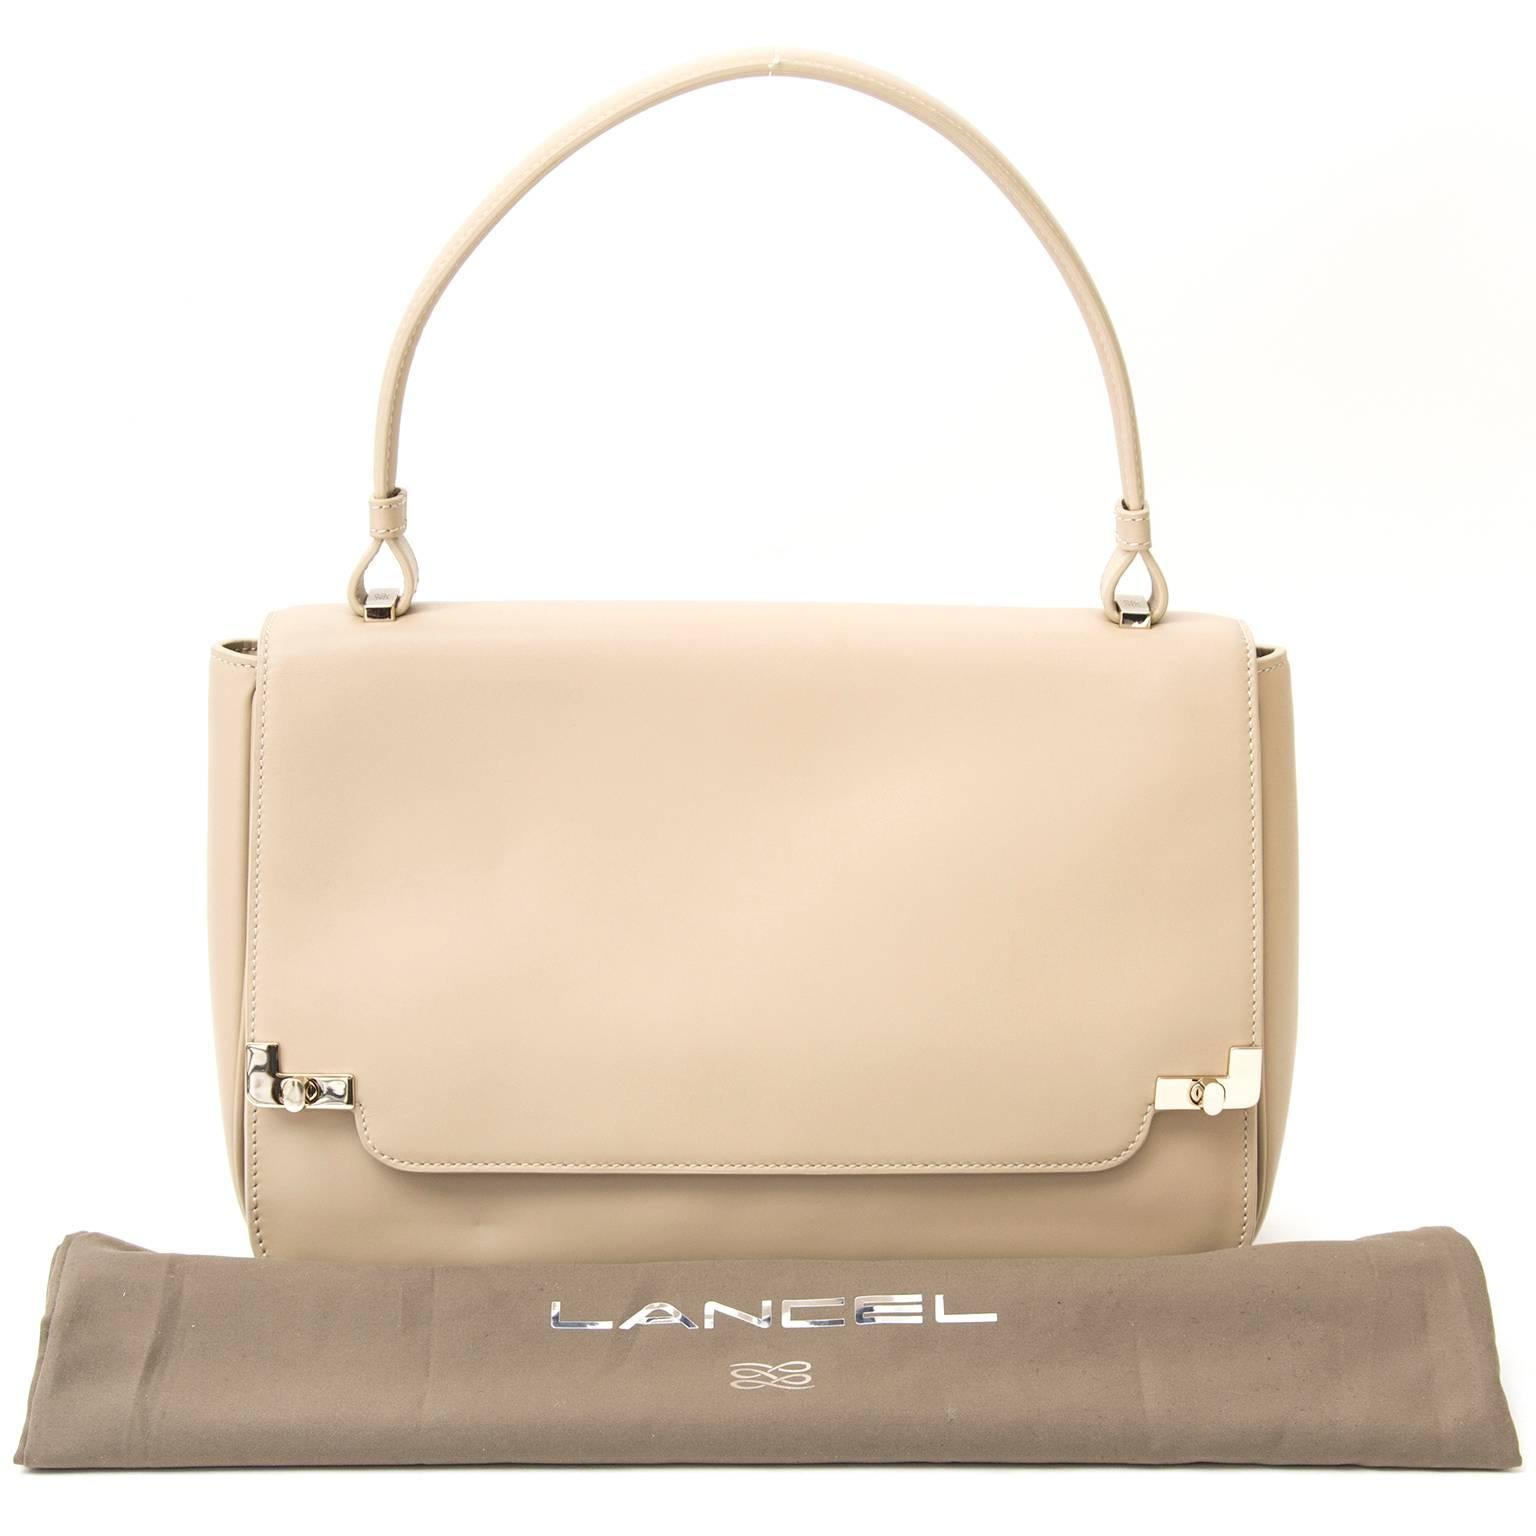 This beige Lancel handbag will make any outfit complete and is very comfortable to wear. Extra compartment at the back which closes with a magnetic press button. The inside features three large compartments with three extra pockets of which one